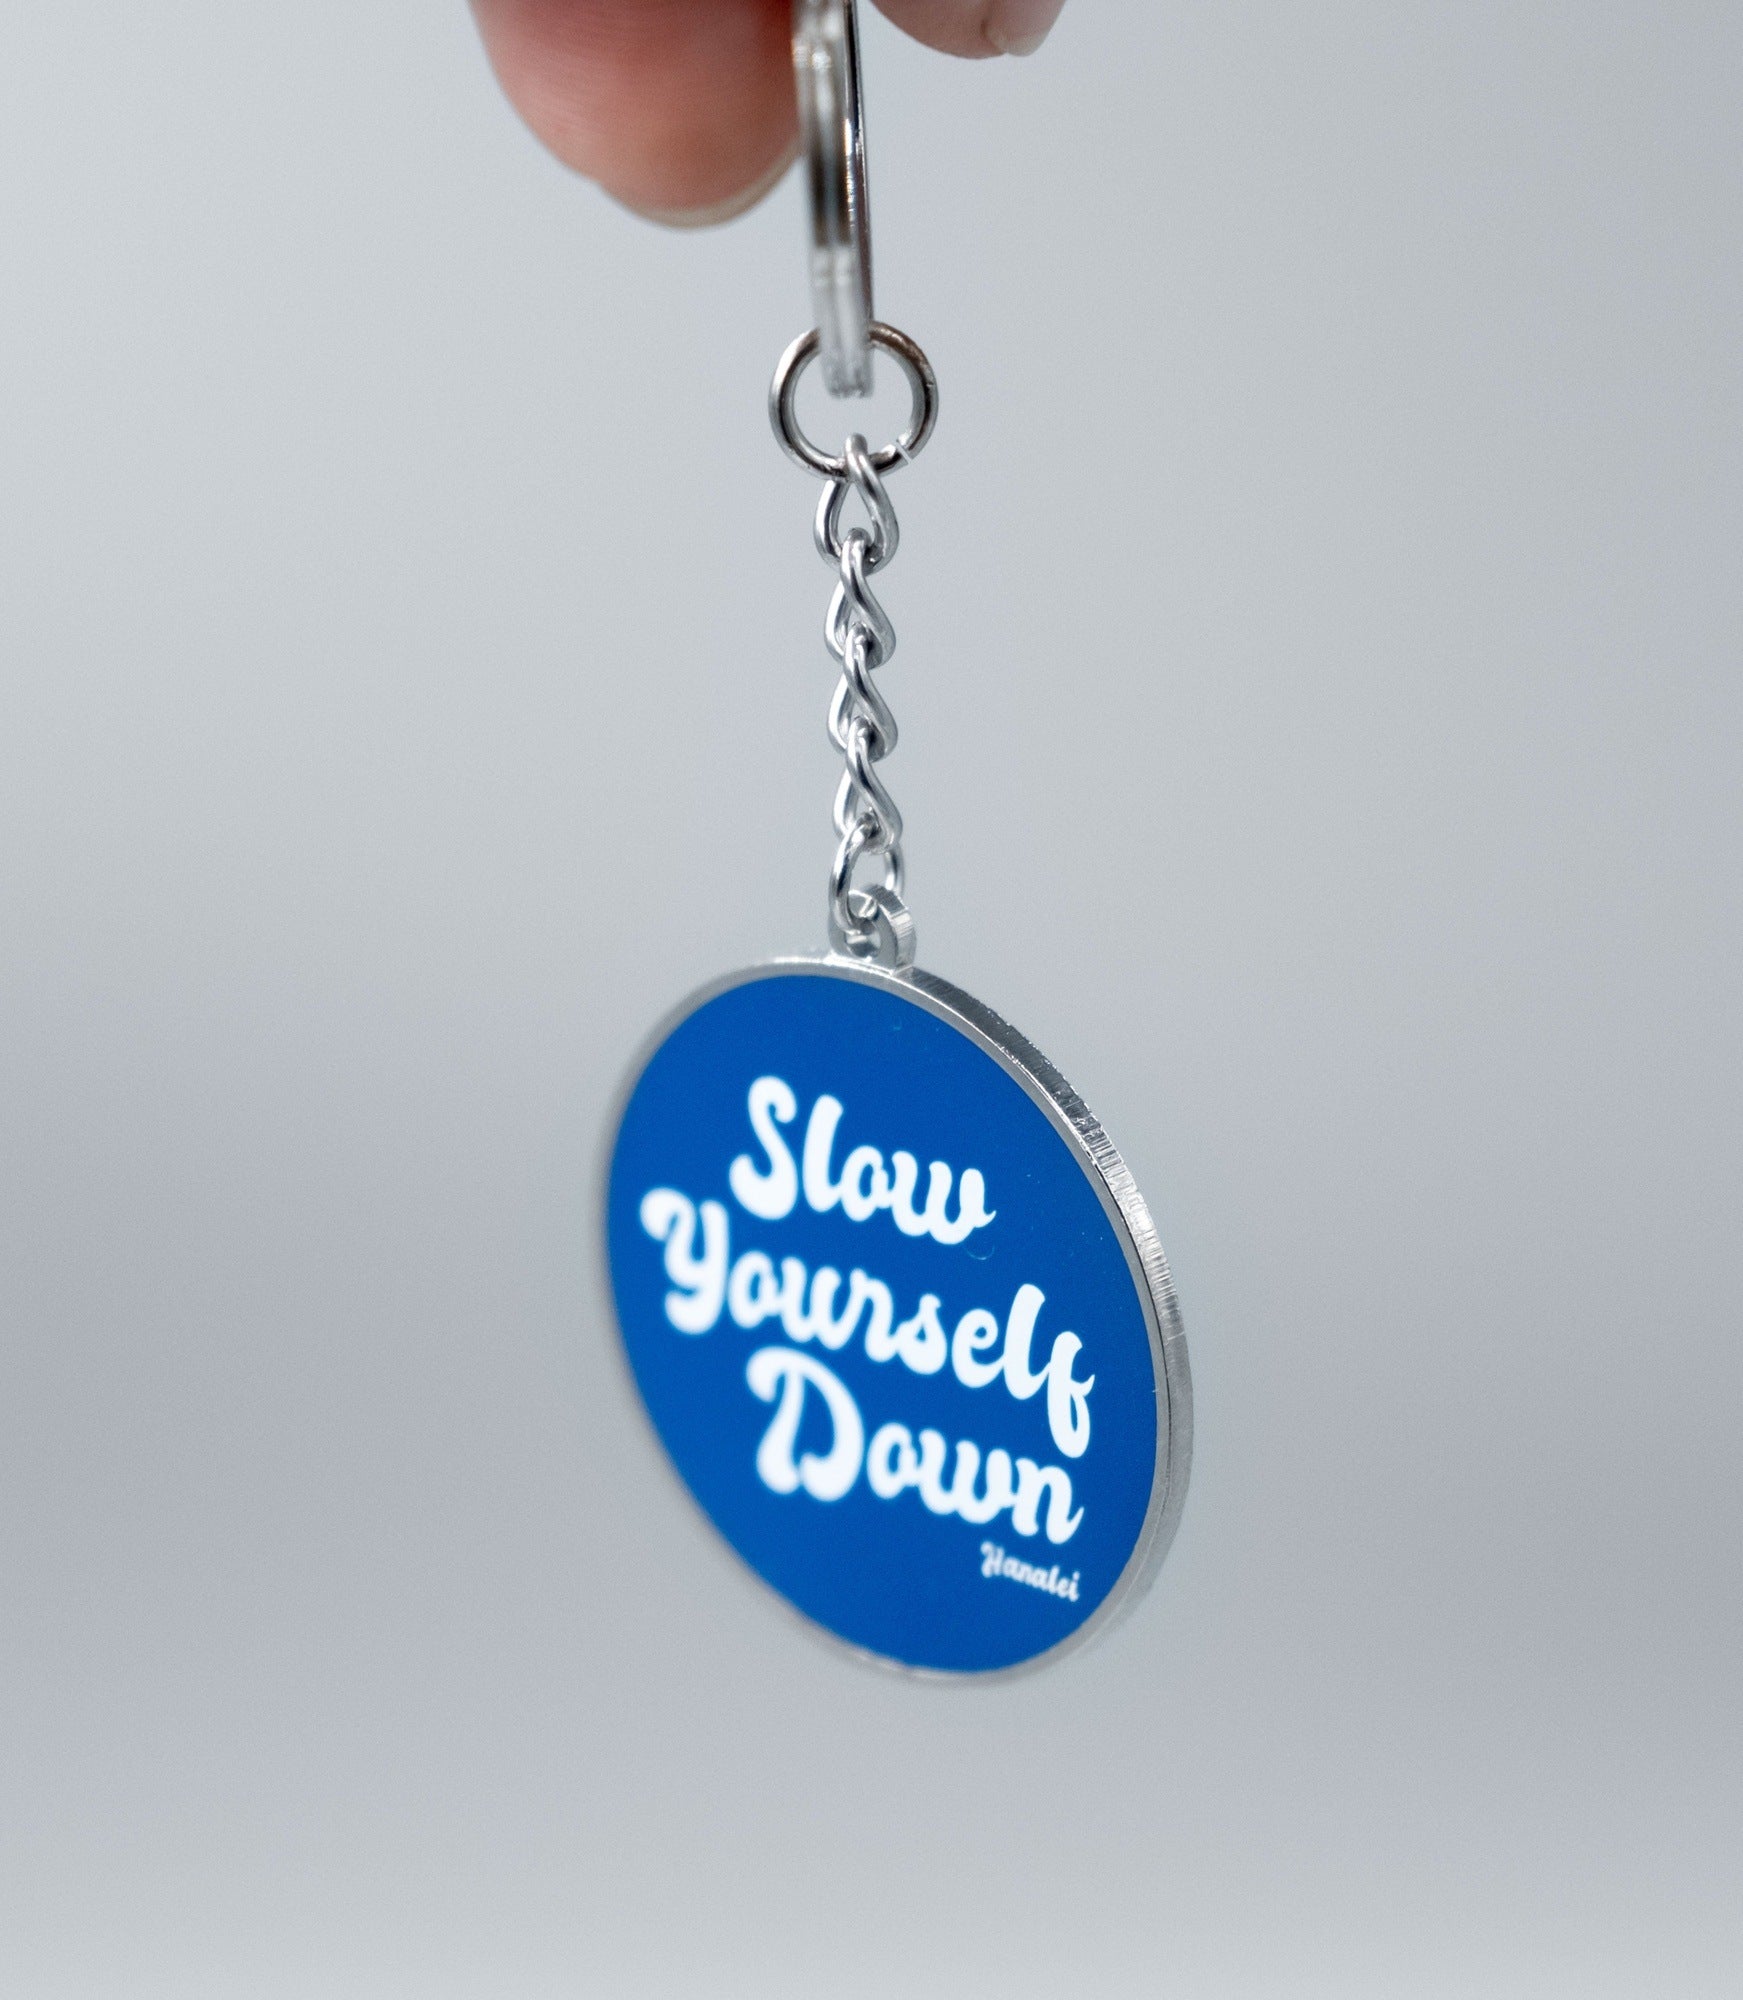 Small Blue Circle Keychain Keychains - Slow Yourself Down